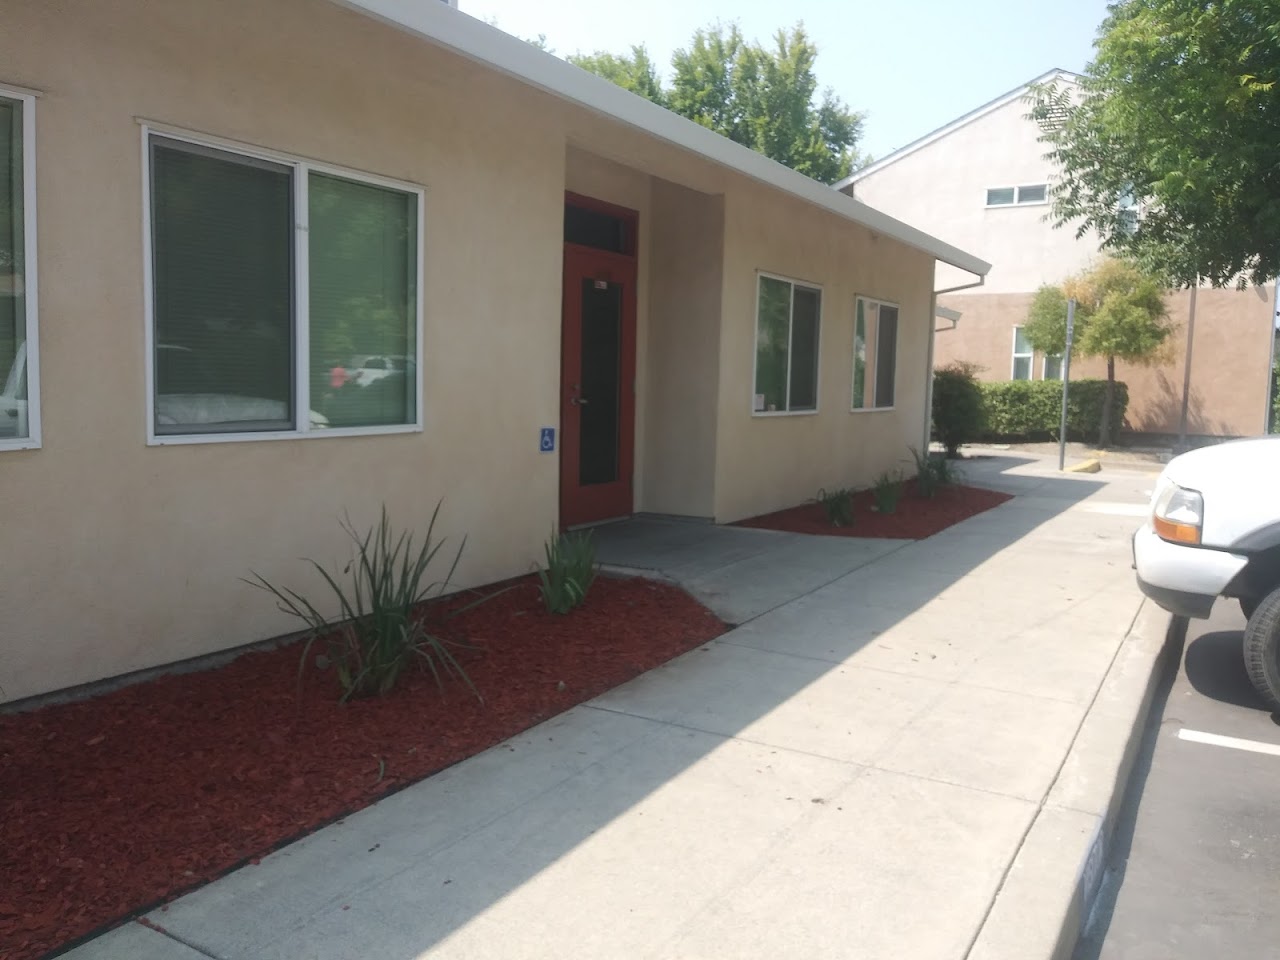 Photo of RANCHO DE SOTO APTS. Affordable housing located at 1003 NEWPORT AVE ORLAND, CA 95963